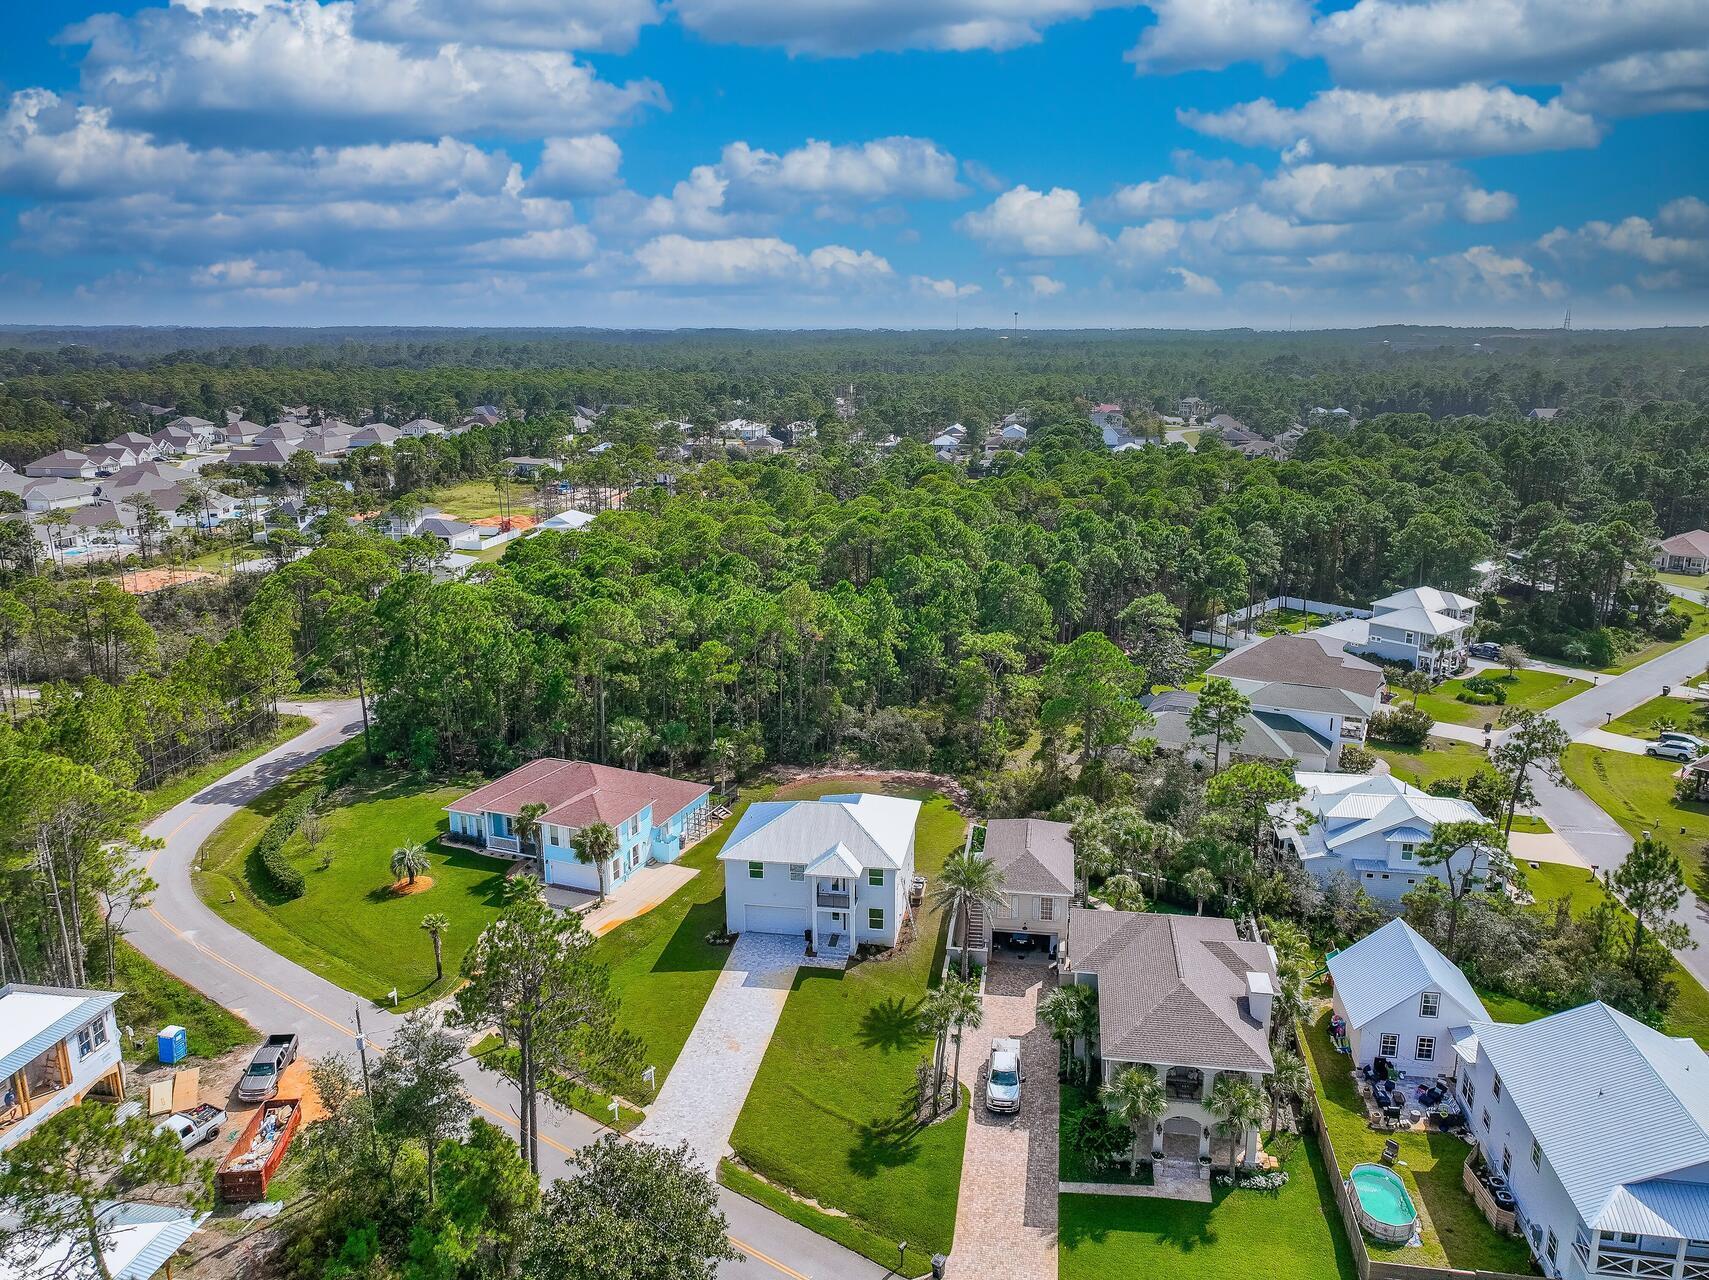 443 Shelter Cove Drive, Santa Rosa Beach, Florida, 32459, United States, 4 Bedrooms Bedrooms, ,4 BathroomsBathrooms,Residential,For Sale,443 Shelter Cove Drive,1340476